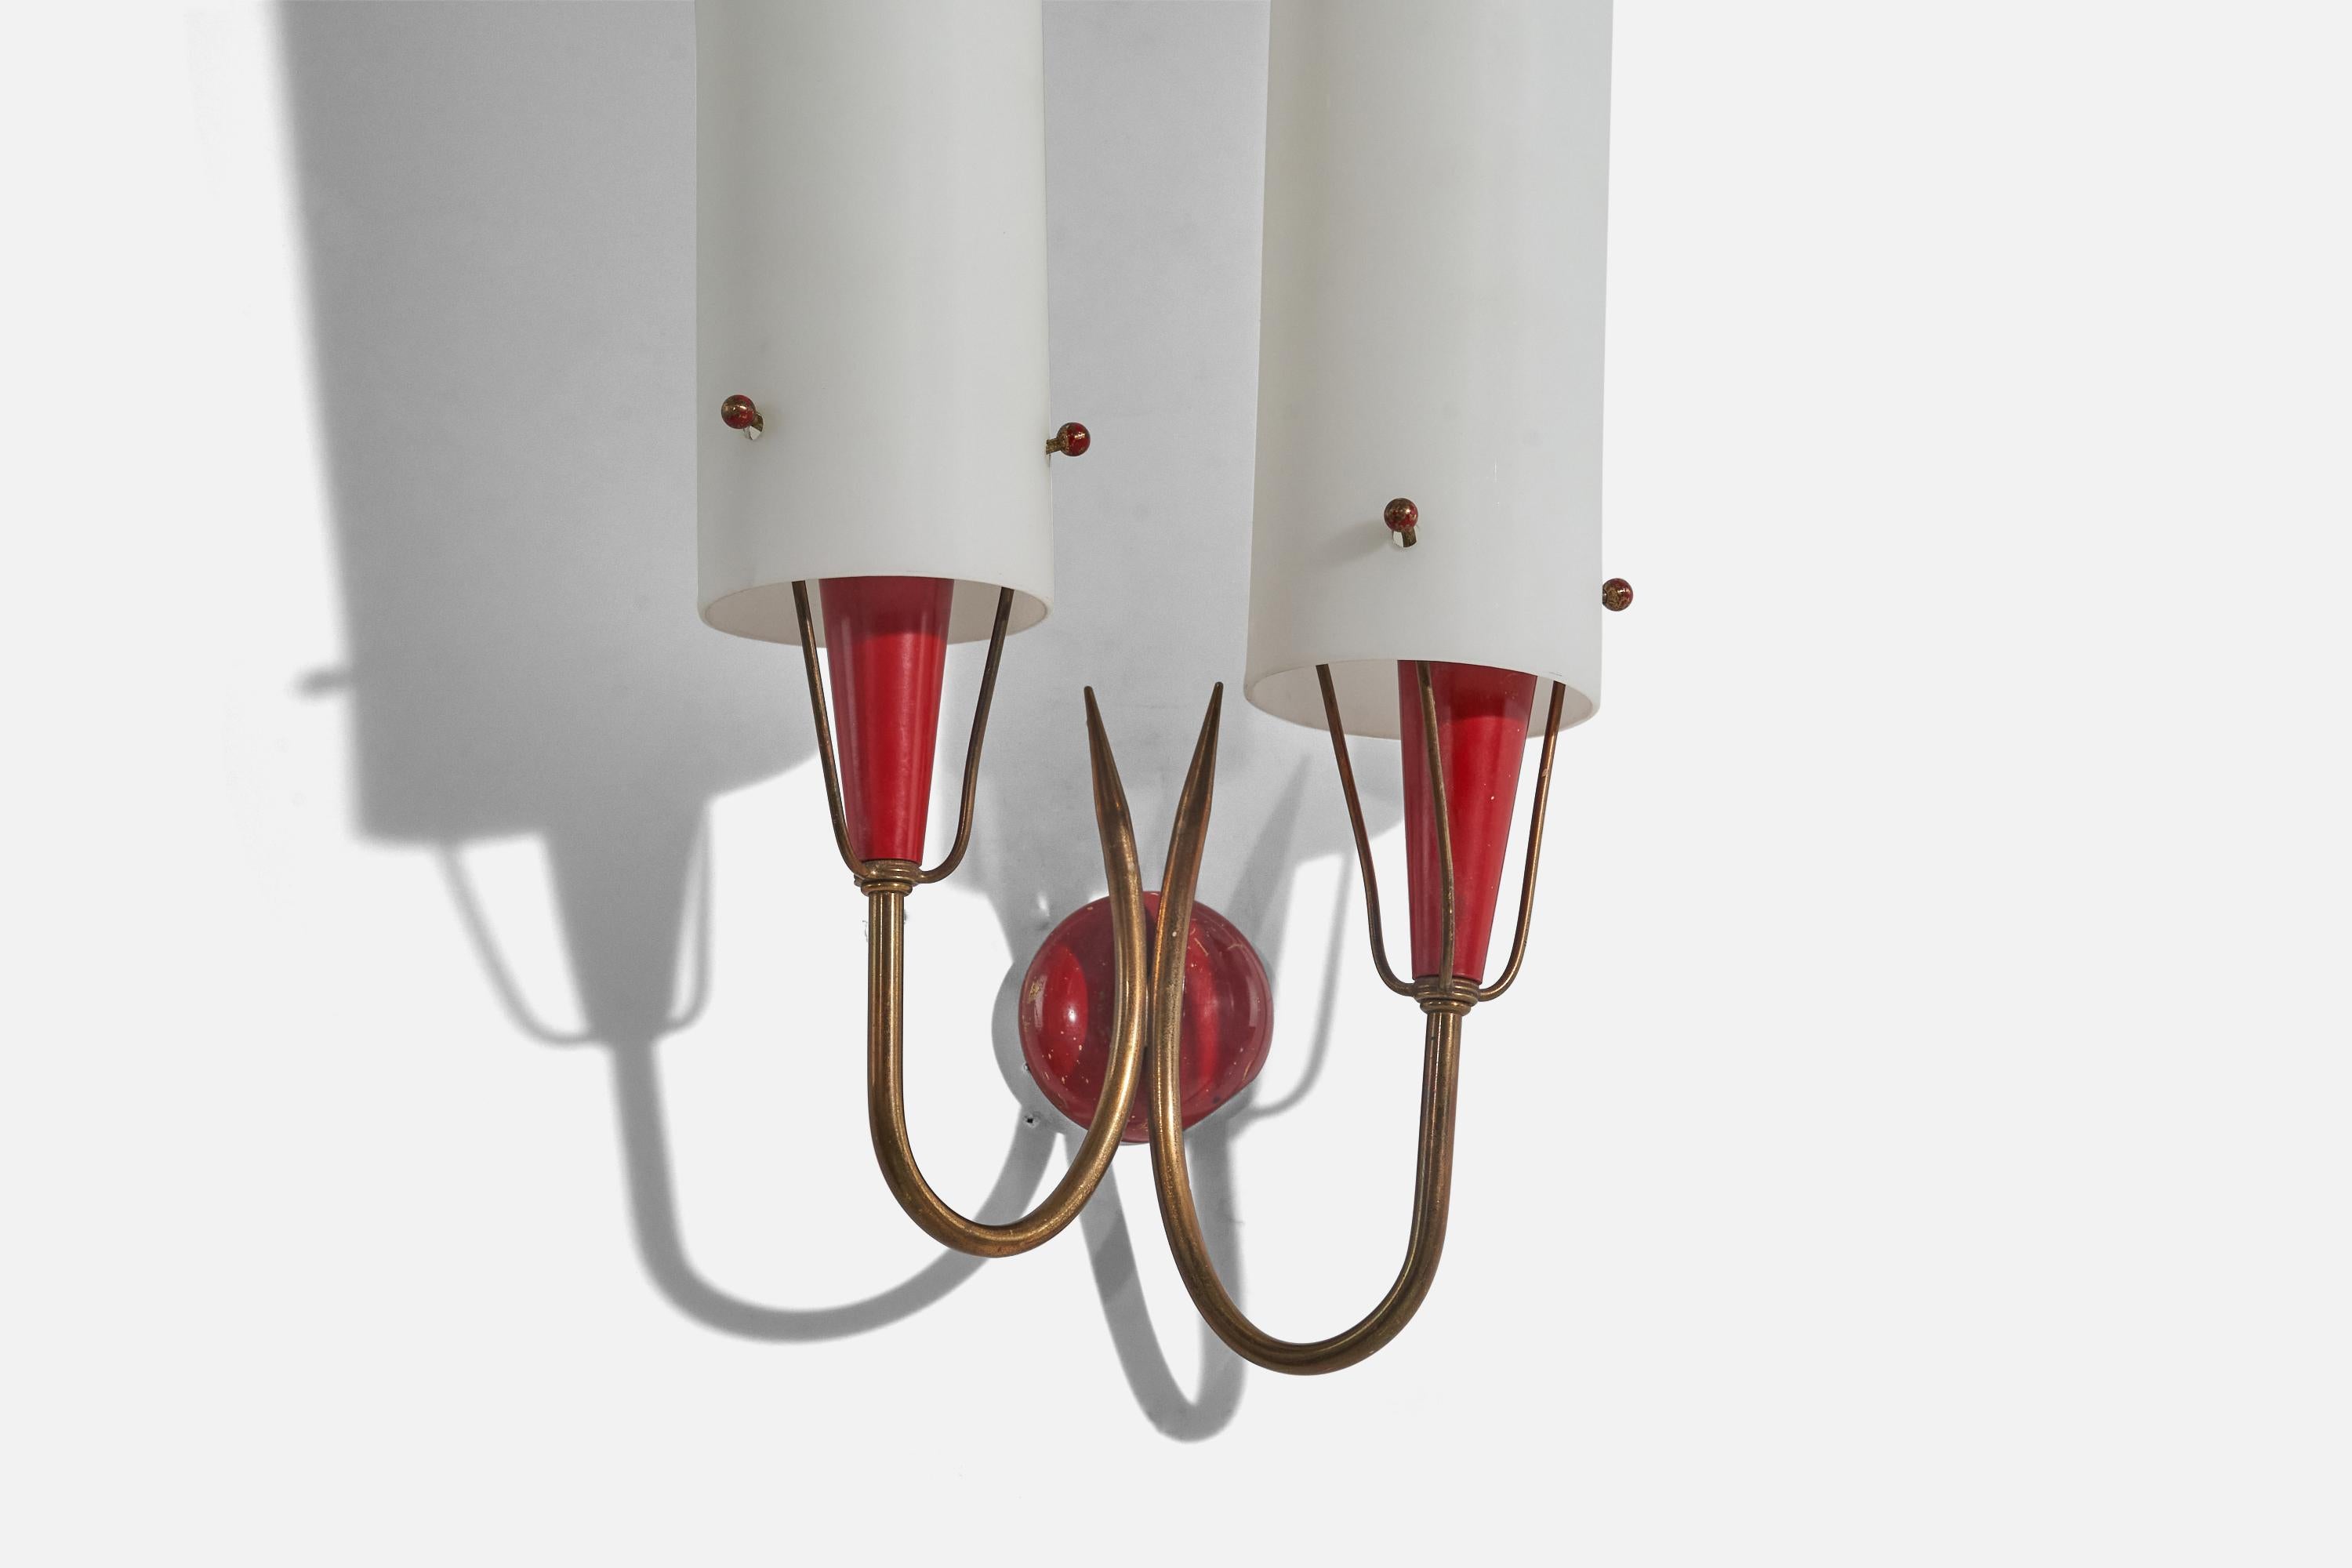 Mid-20th Century Italian Designer, Wall Lights, Brass, Red-Lacquered Metal, Glass, Italy, 1950s For Sale